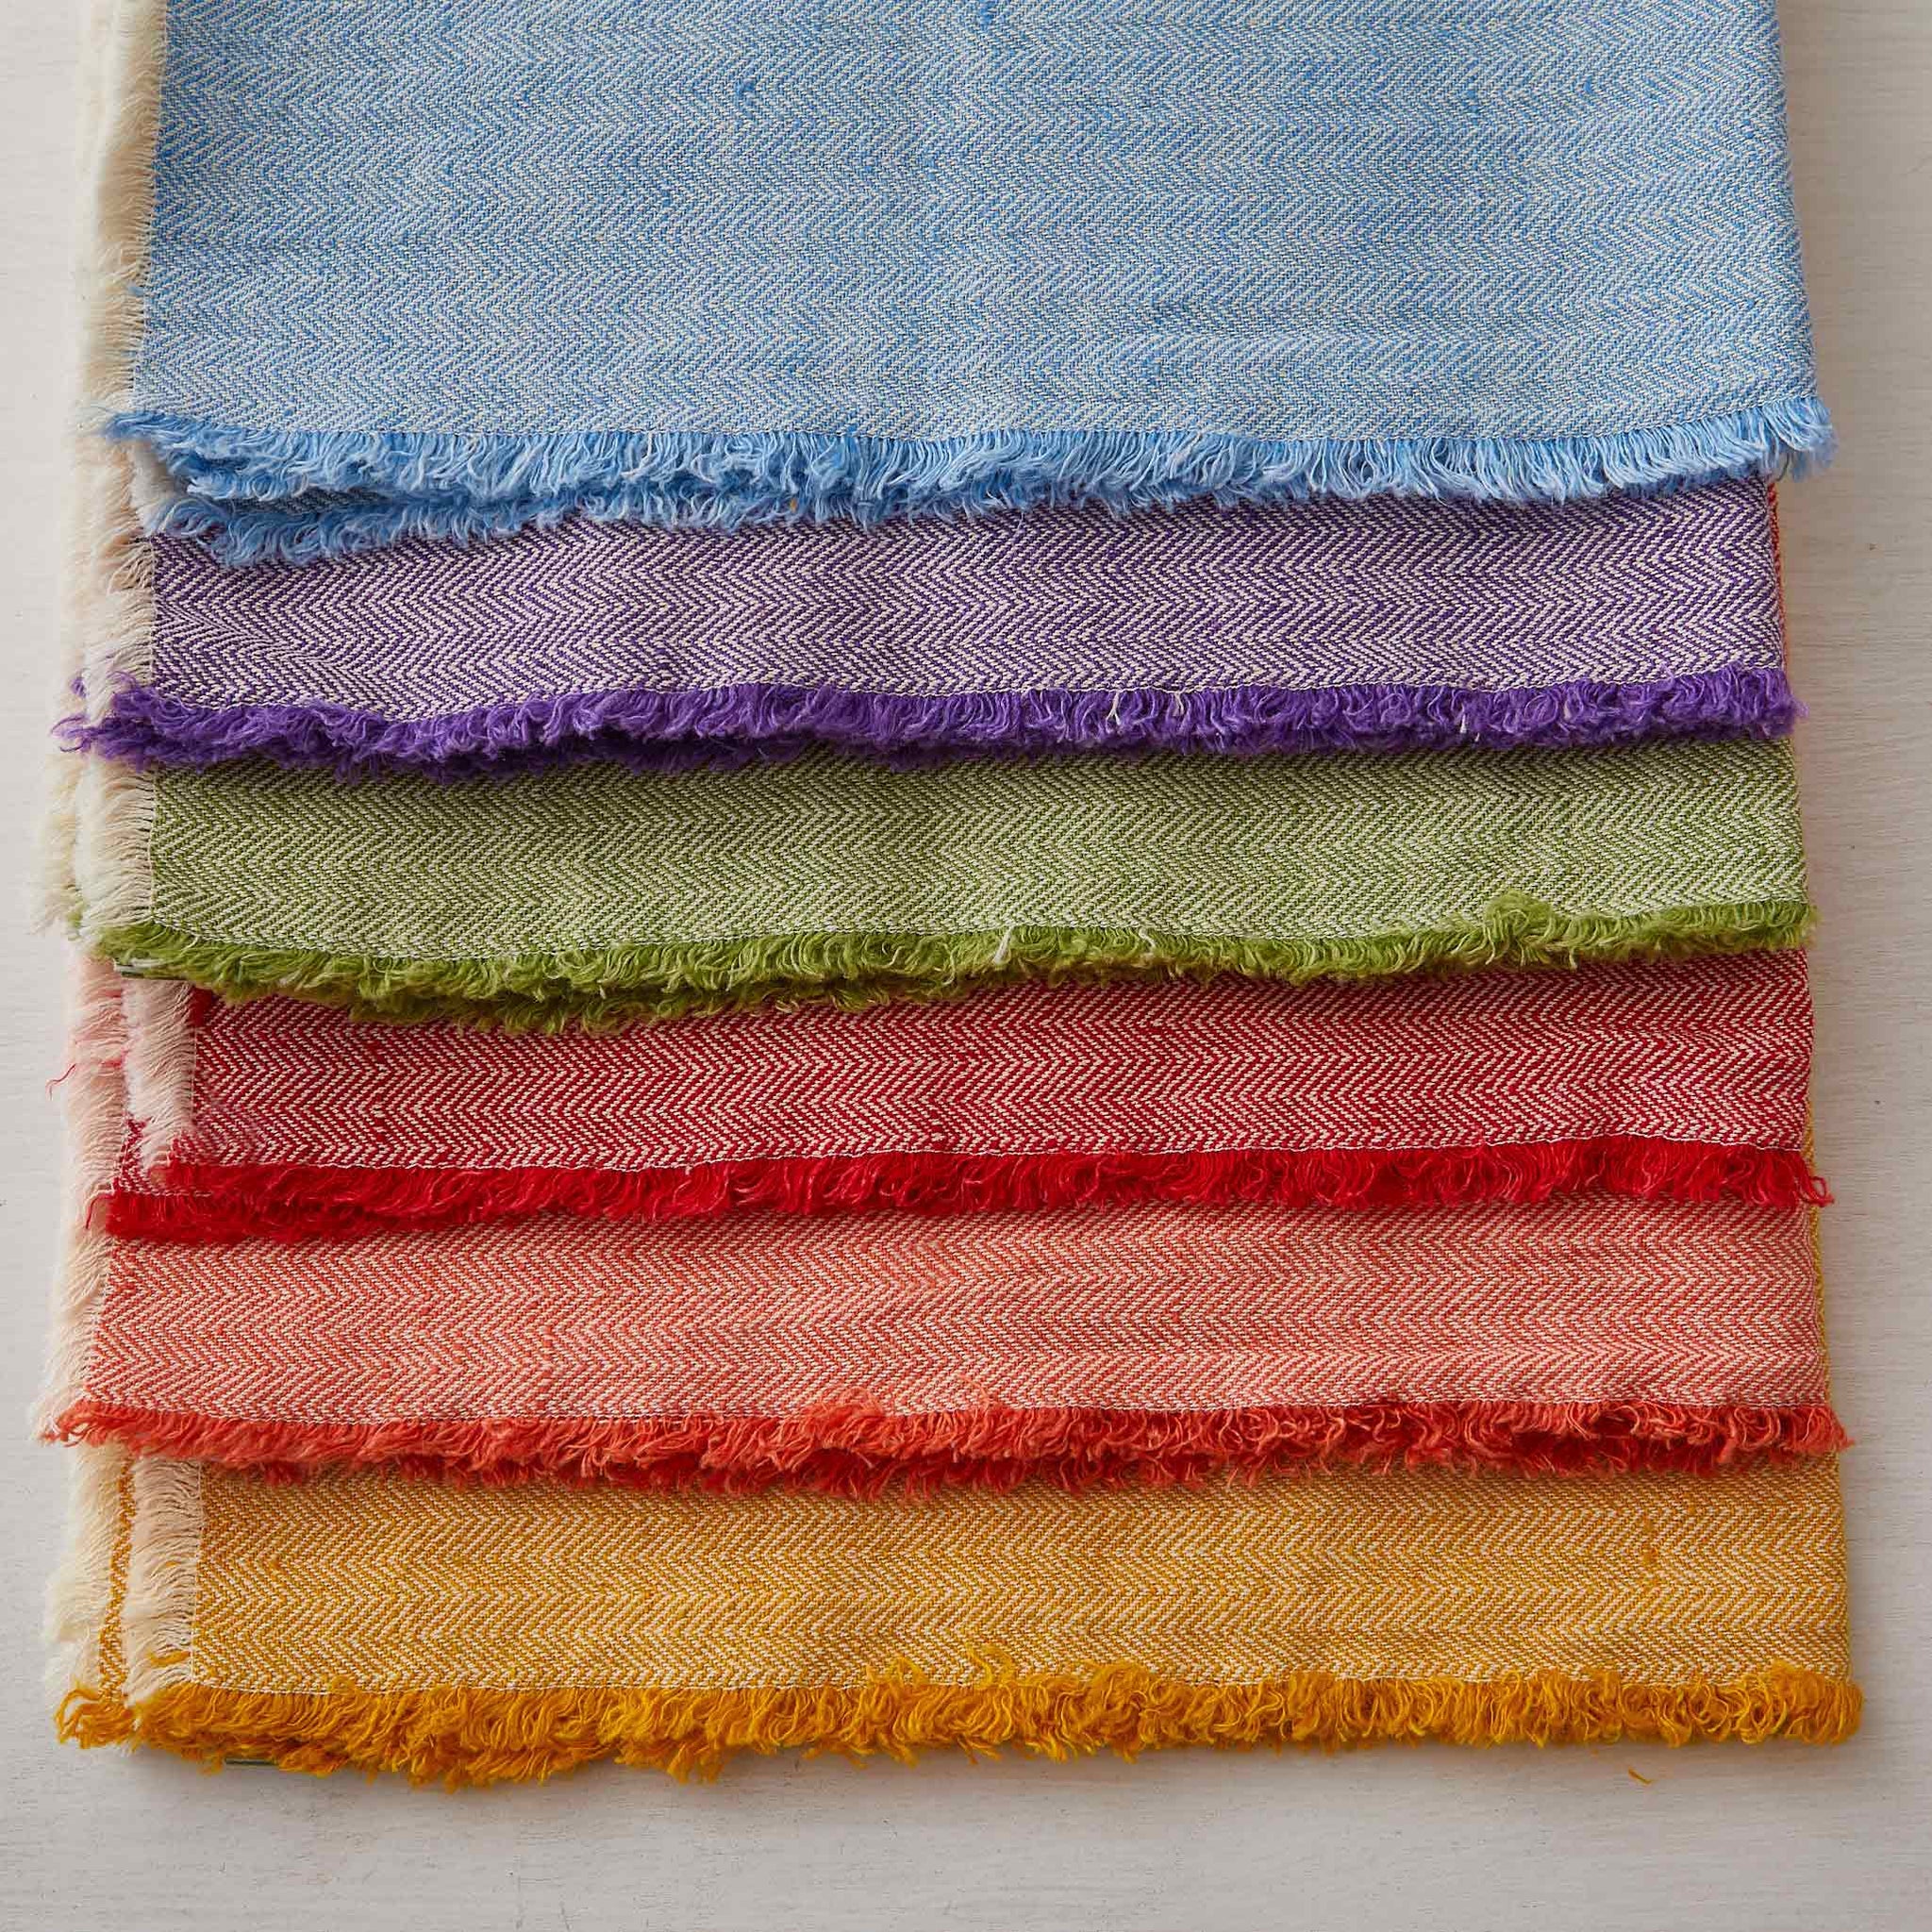 Washed Linen Napkins in Various Colors. Herringbone Weave, Washed